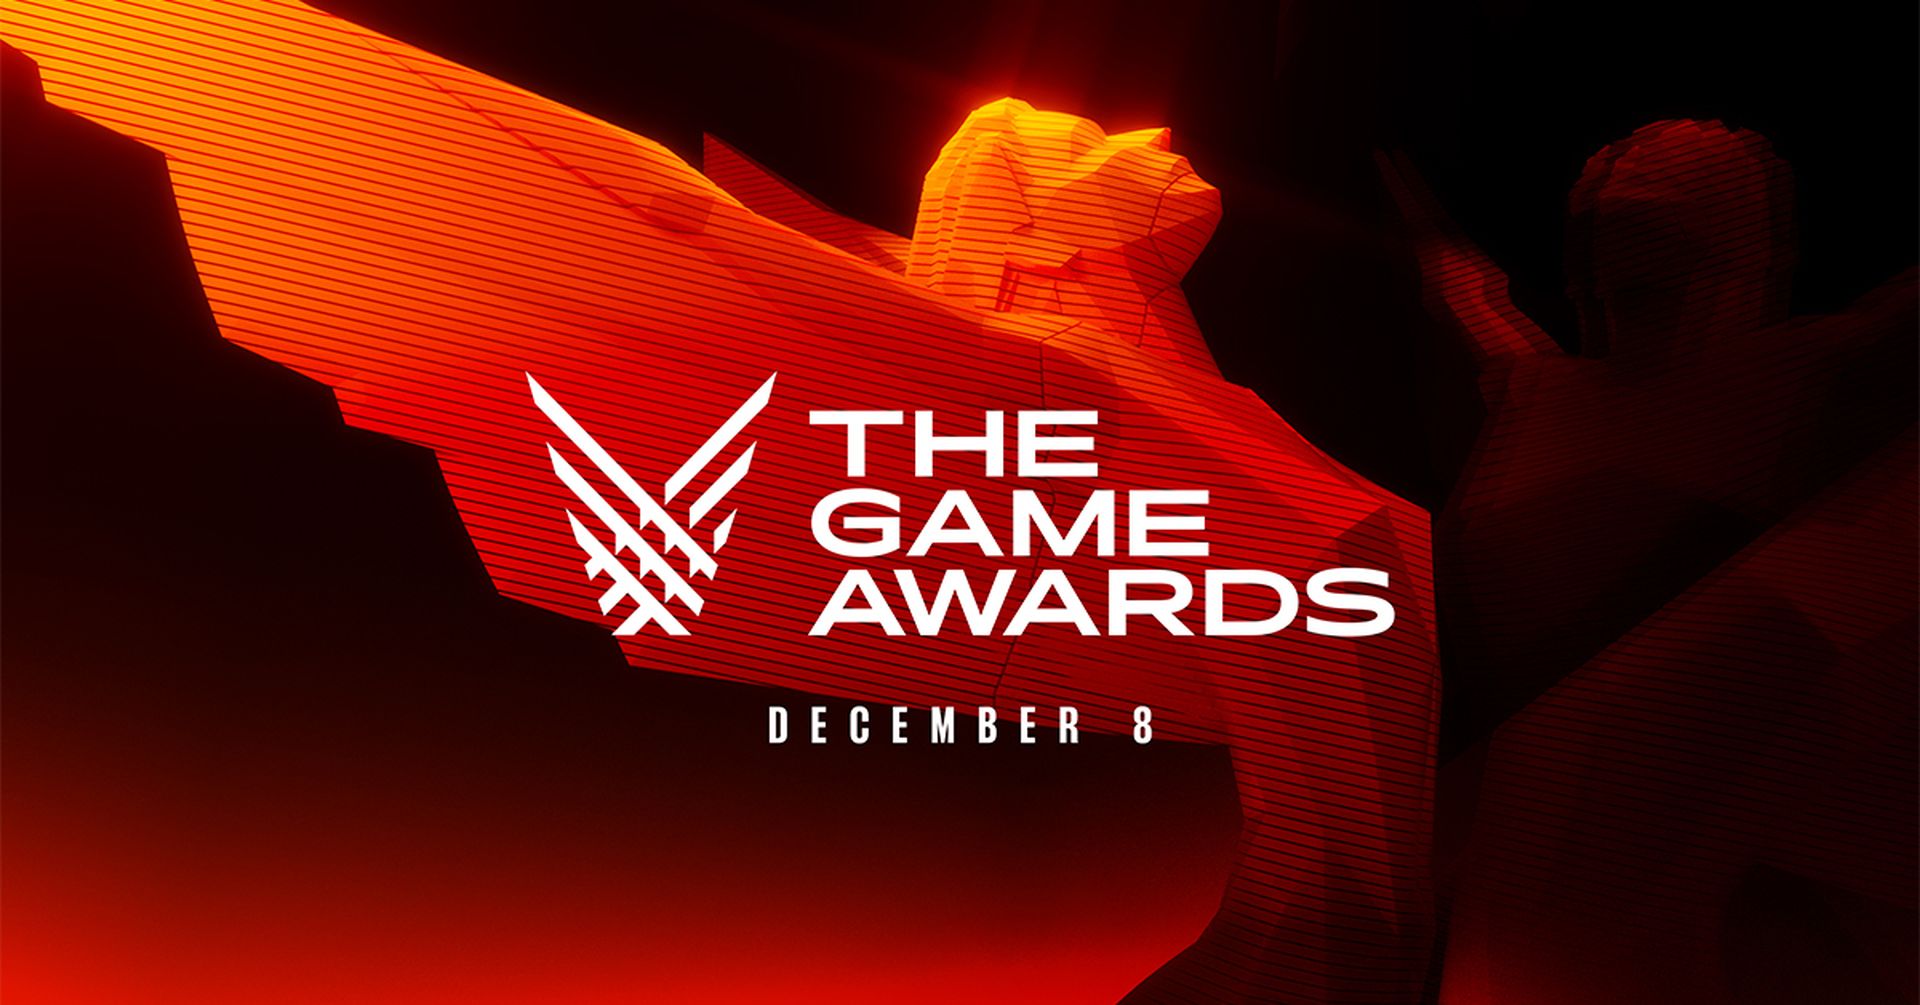 The event that celebrates the best in gaming is once again upon us, and this time you can take part in The Game Awards Steam Deck giveaway to snatch yourself...